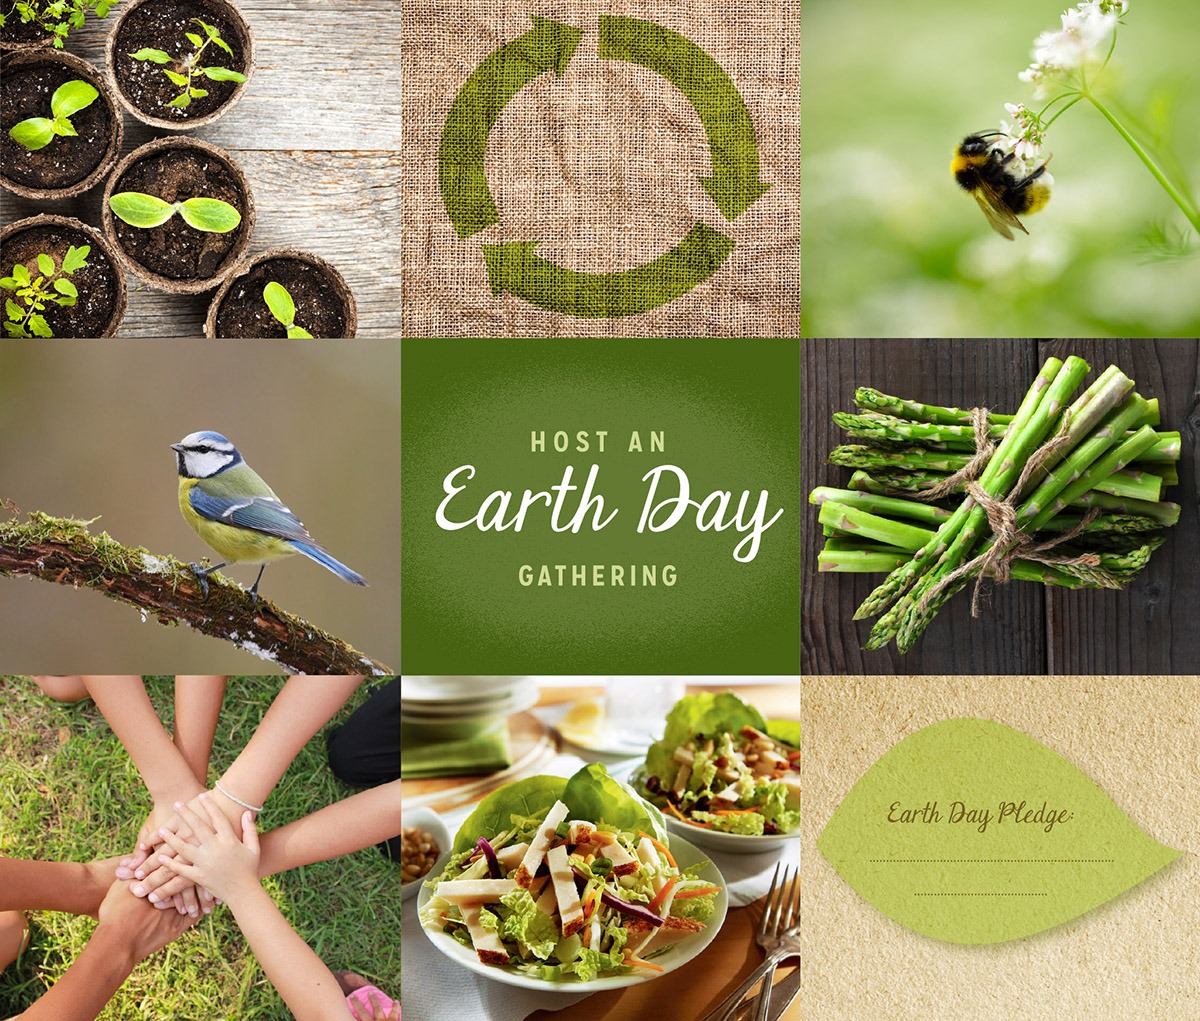 Earth Day is April 22nd